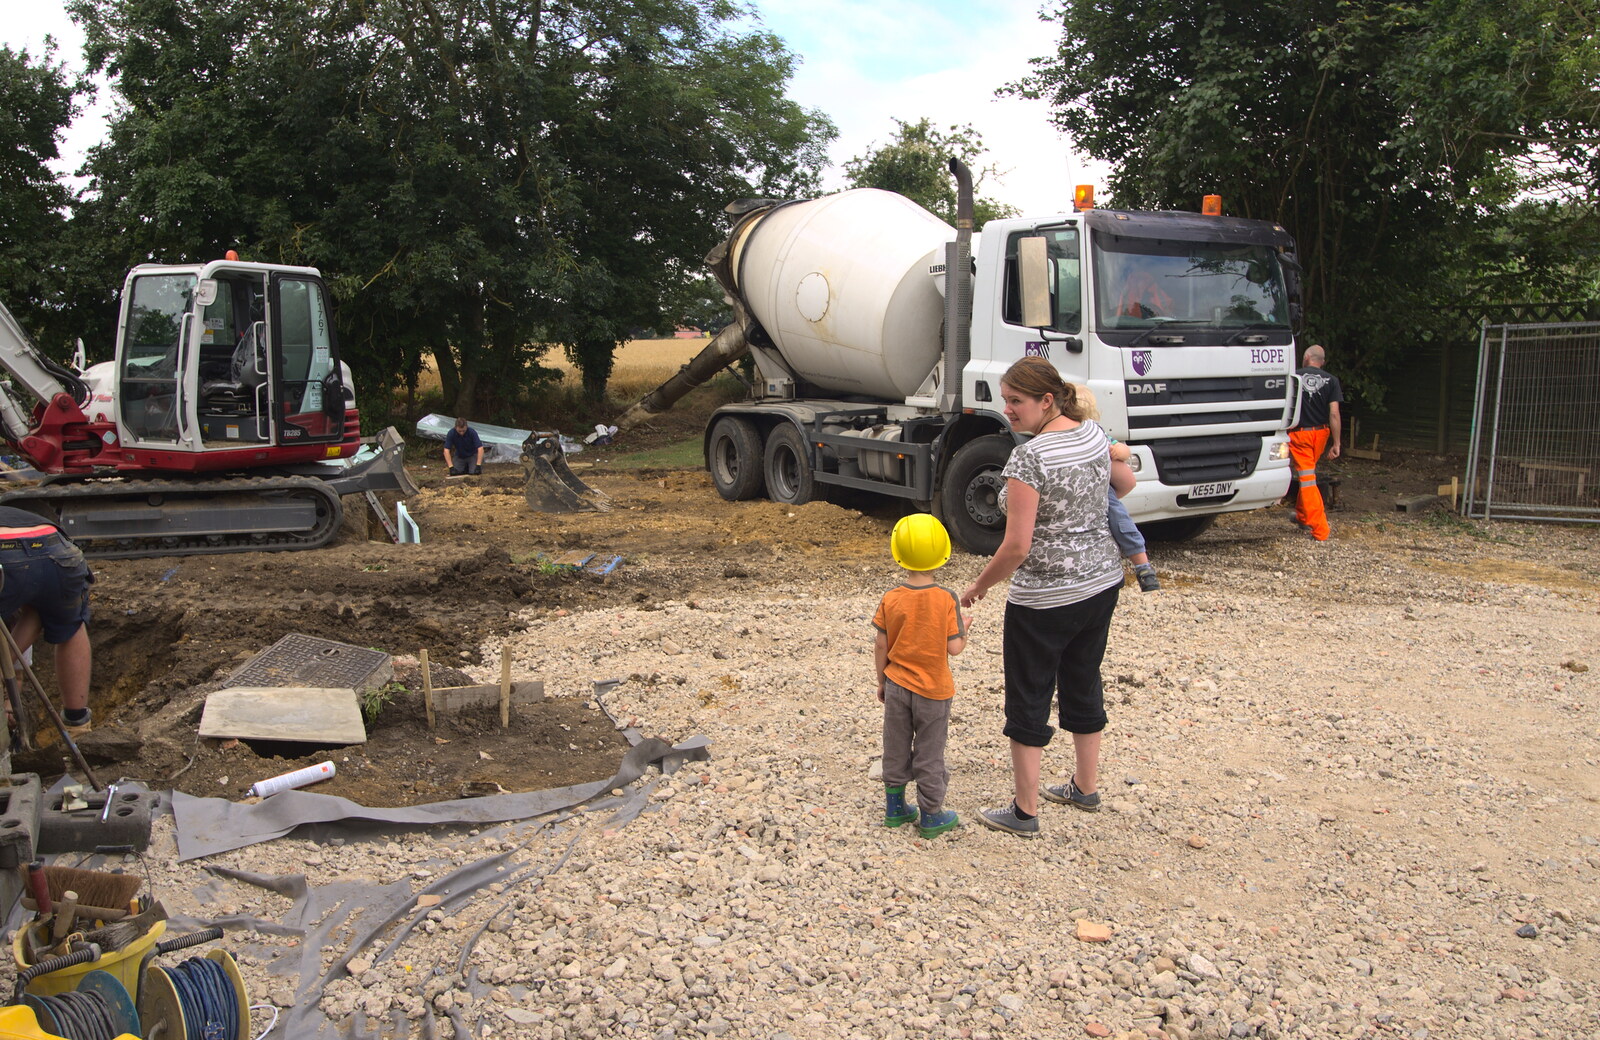 Fred, Isobel and Harry go for a look from Grand Designs: Building Commences, Brome, Suffolk - 8th August 2013